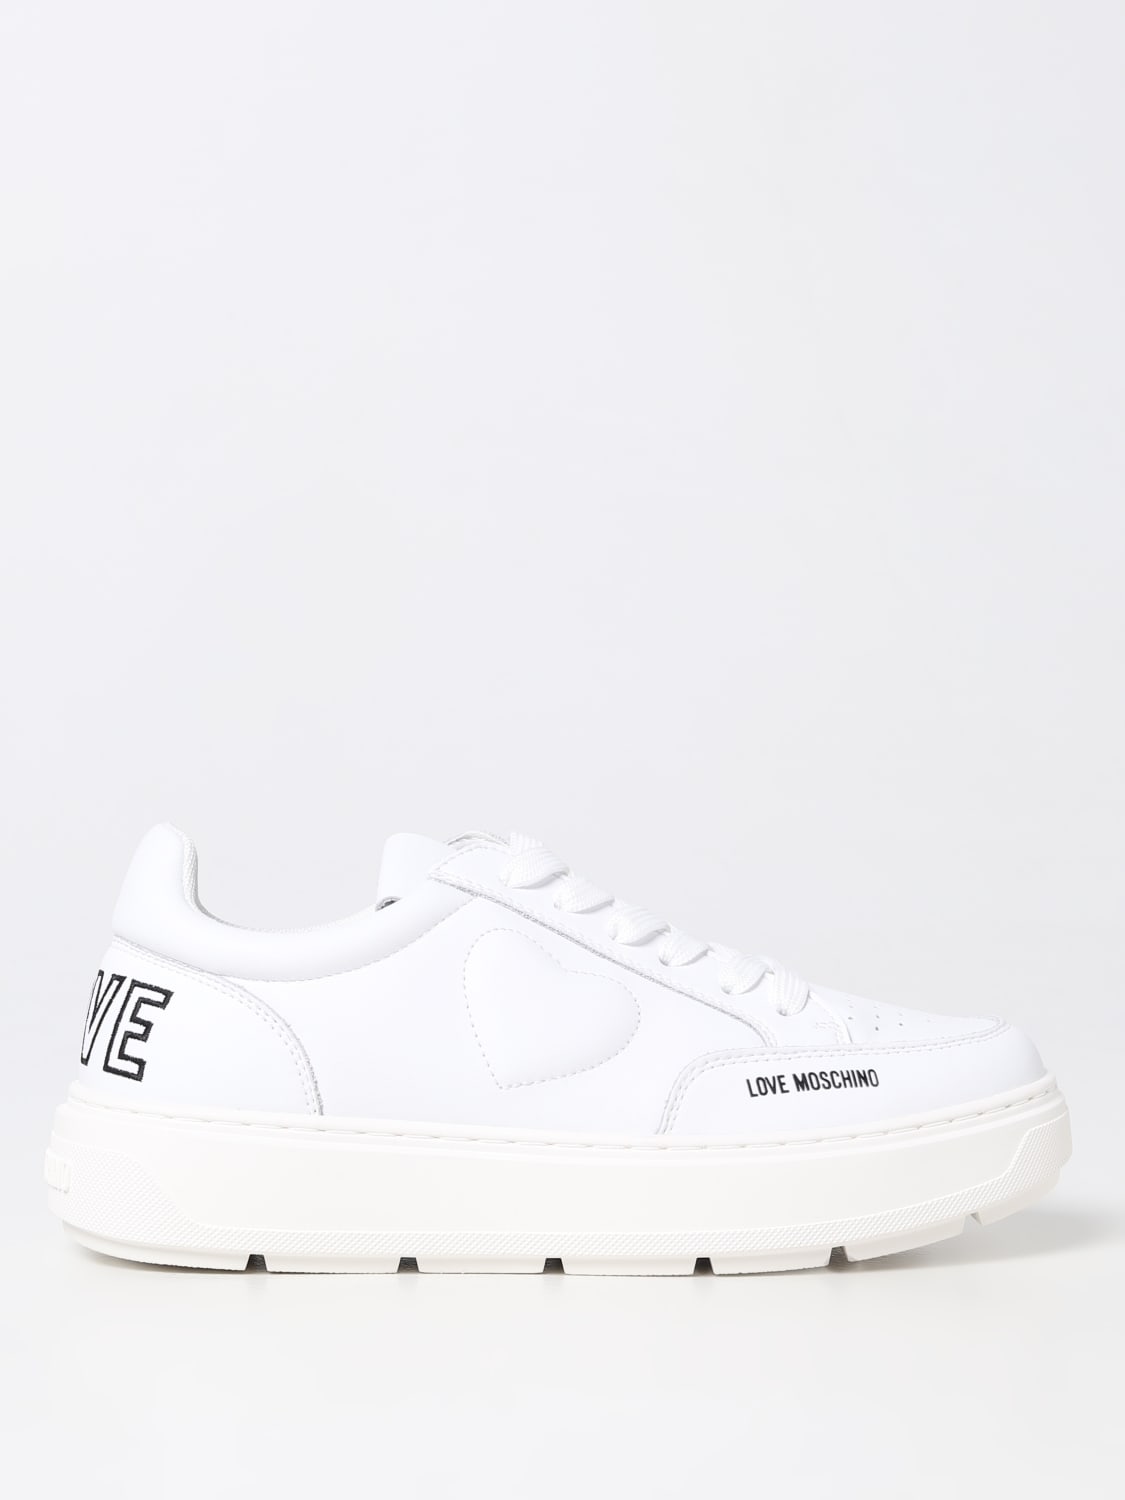 Love Moschino women's sneaker in black and white leather